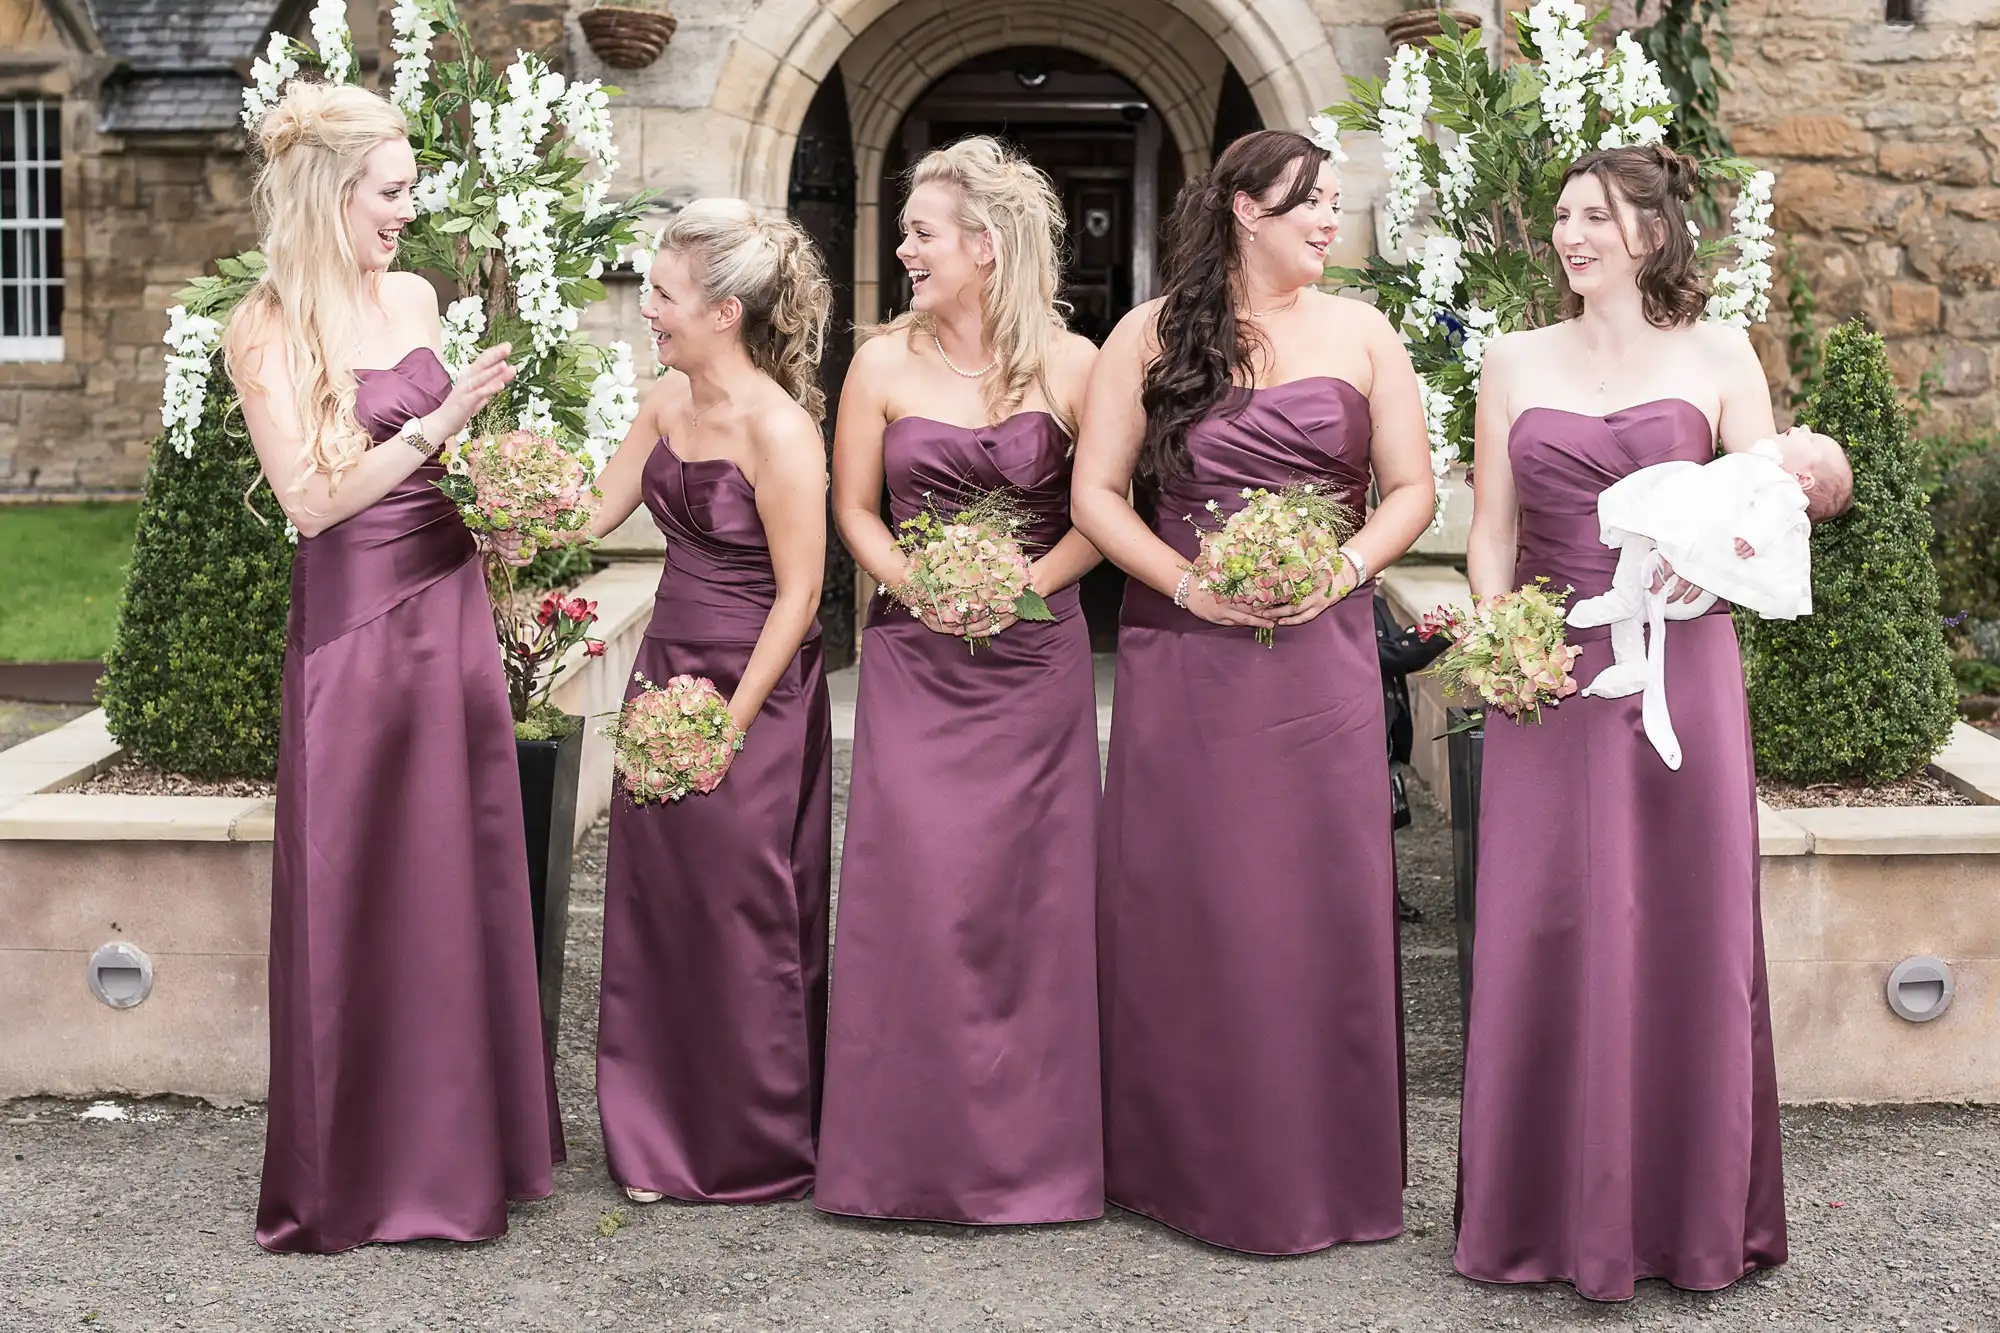 Five women in matching burgundy dresses holding bouquets, with one holding a baby, standing outside a stone building.